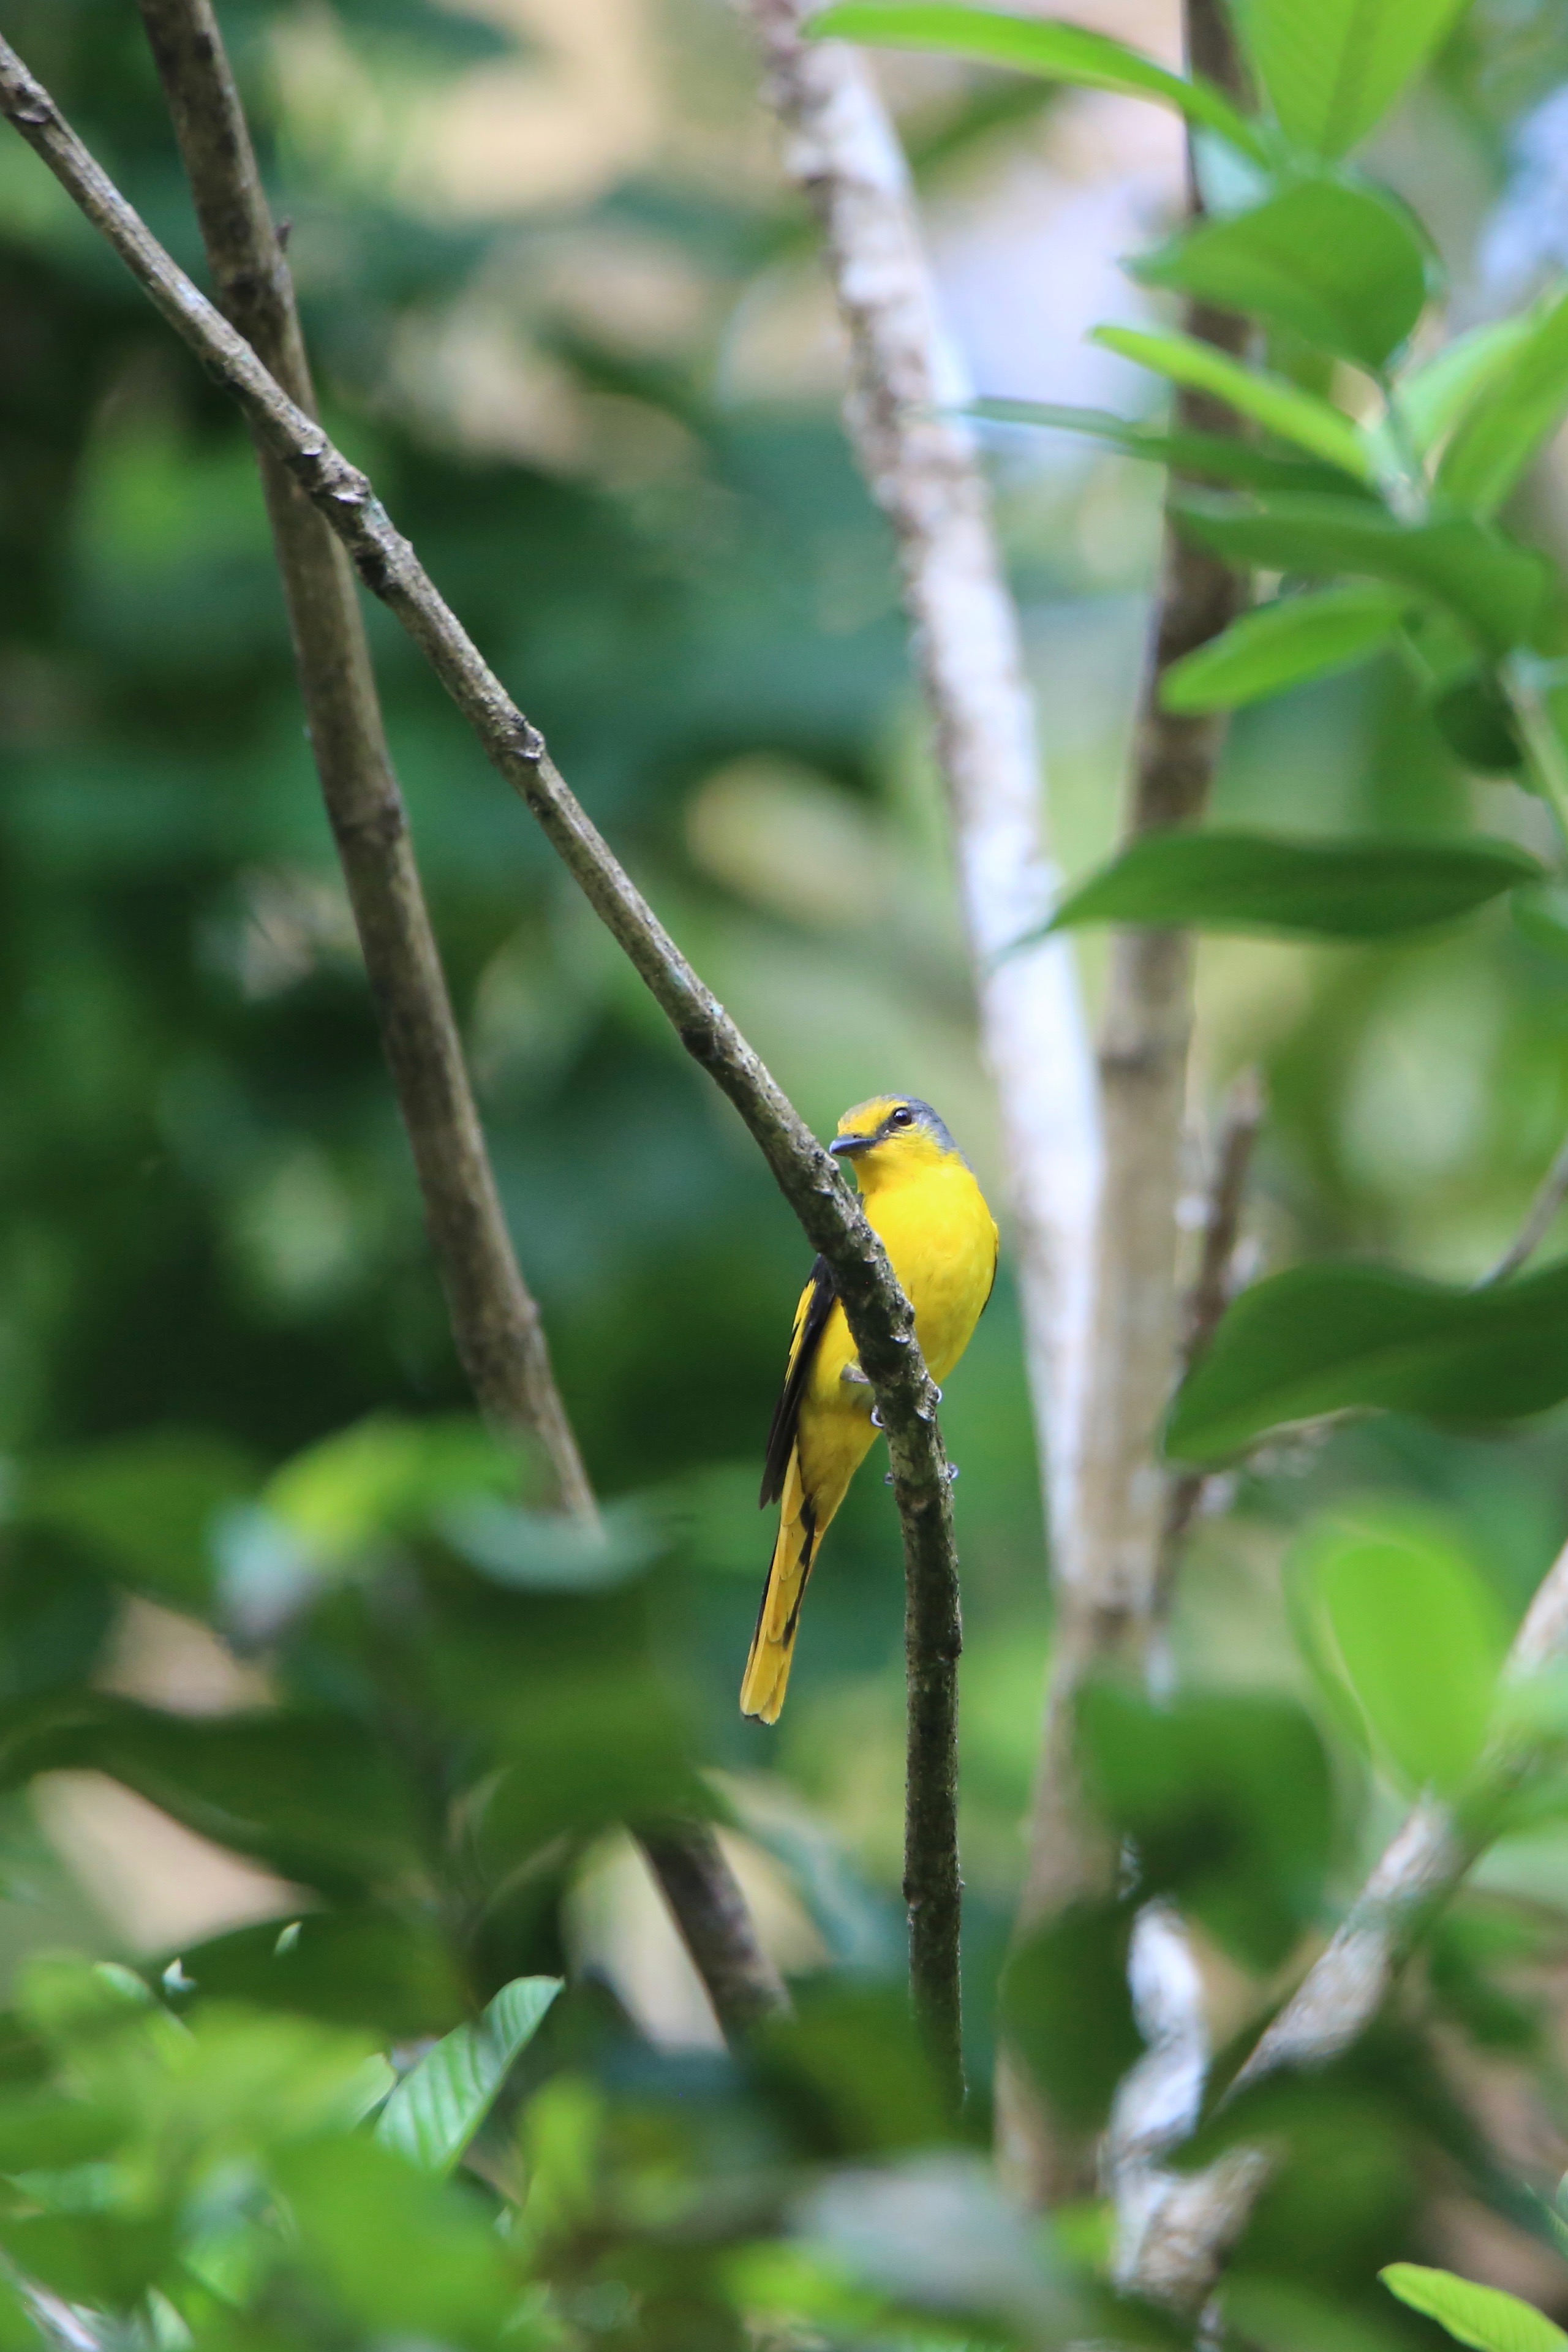 Orange Minivet Male and Female high resolution images free